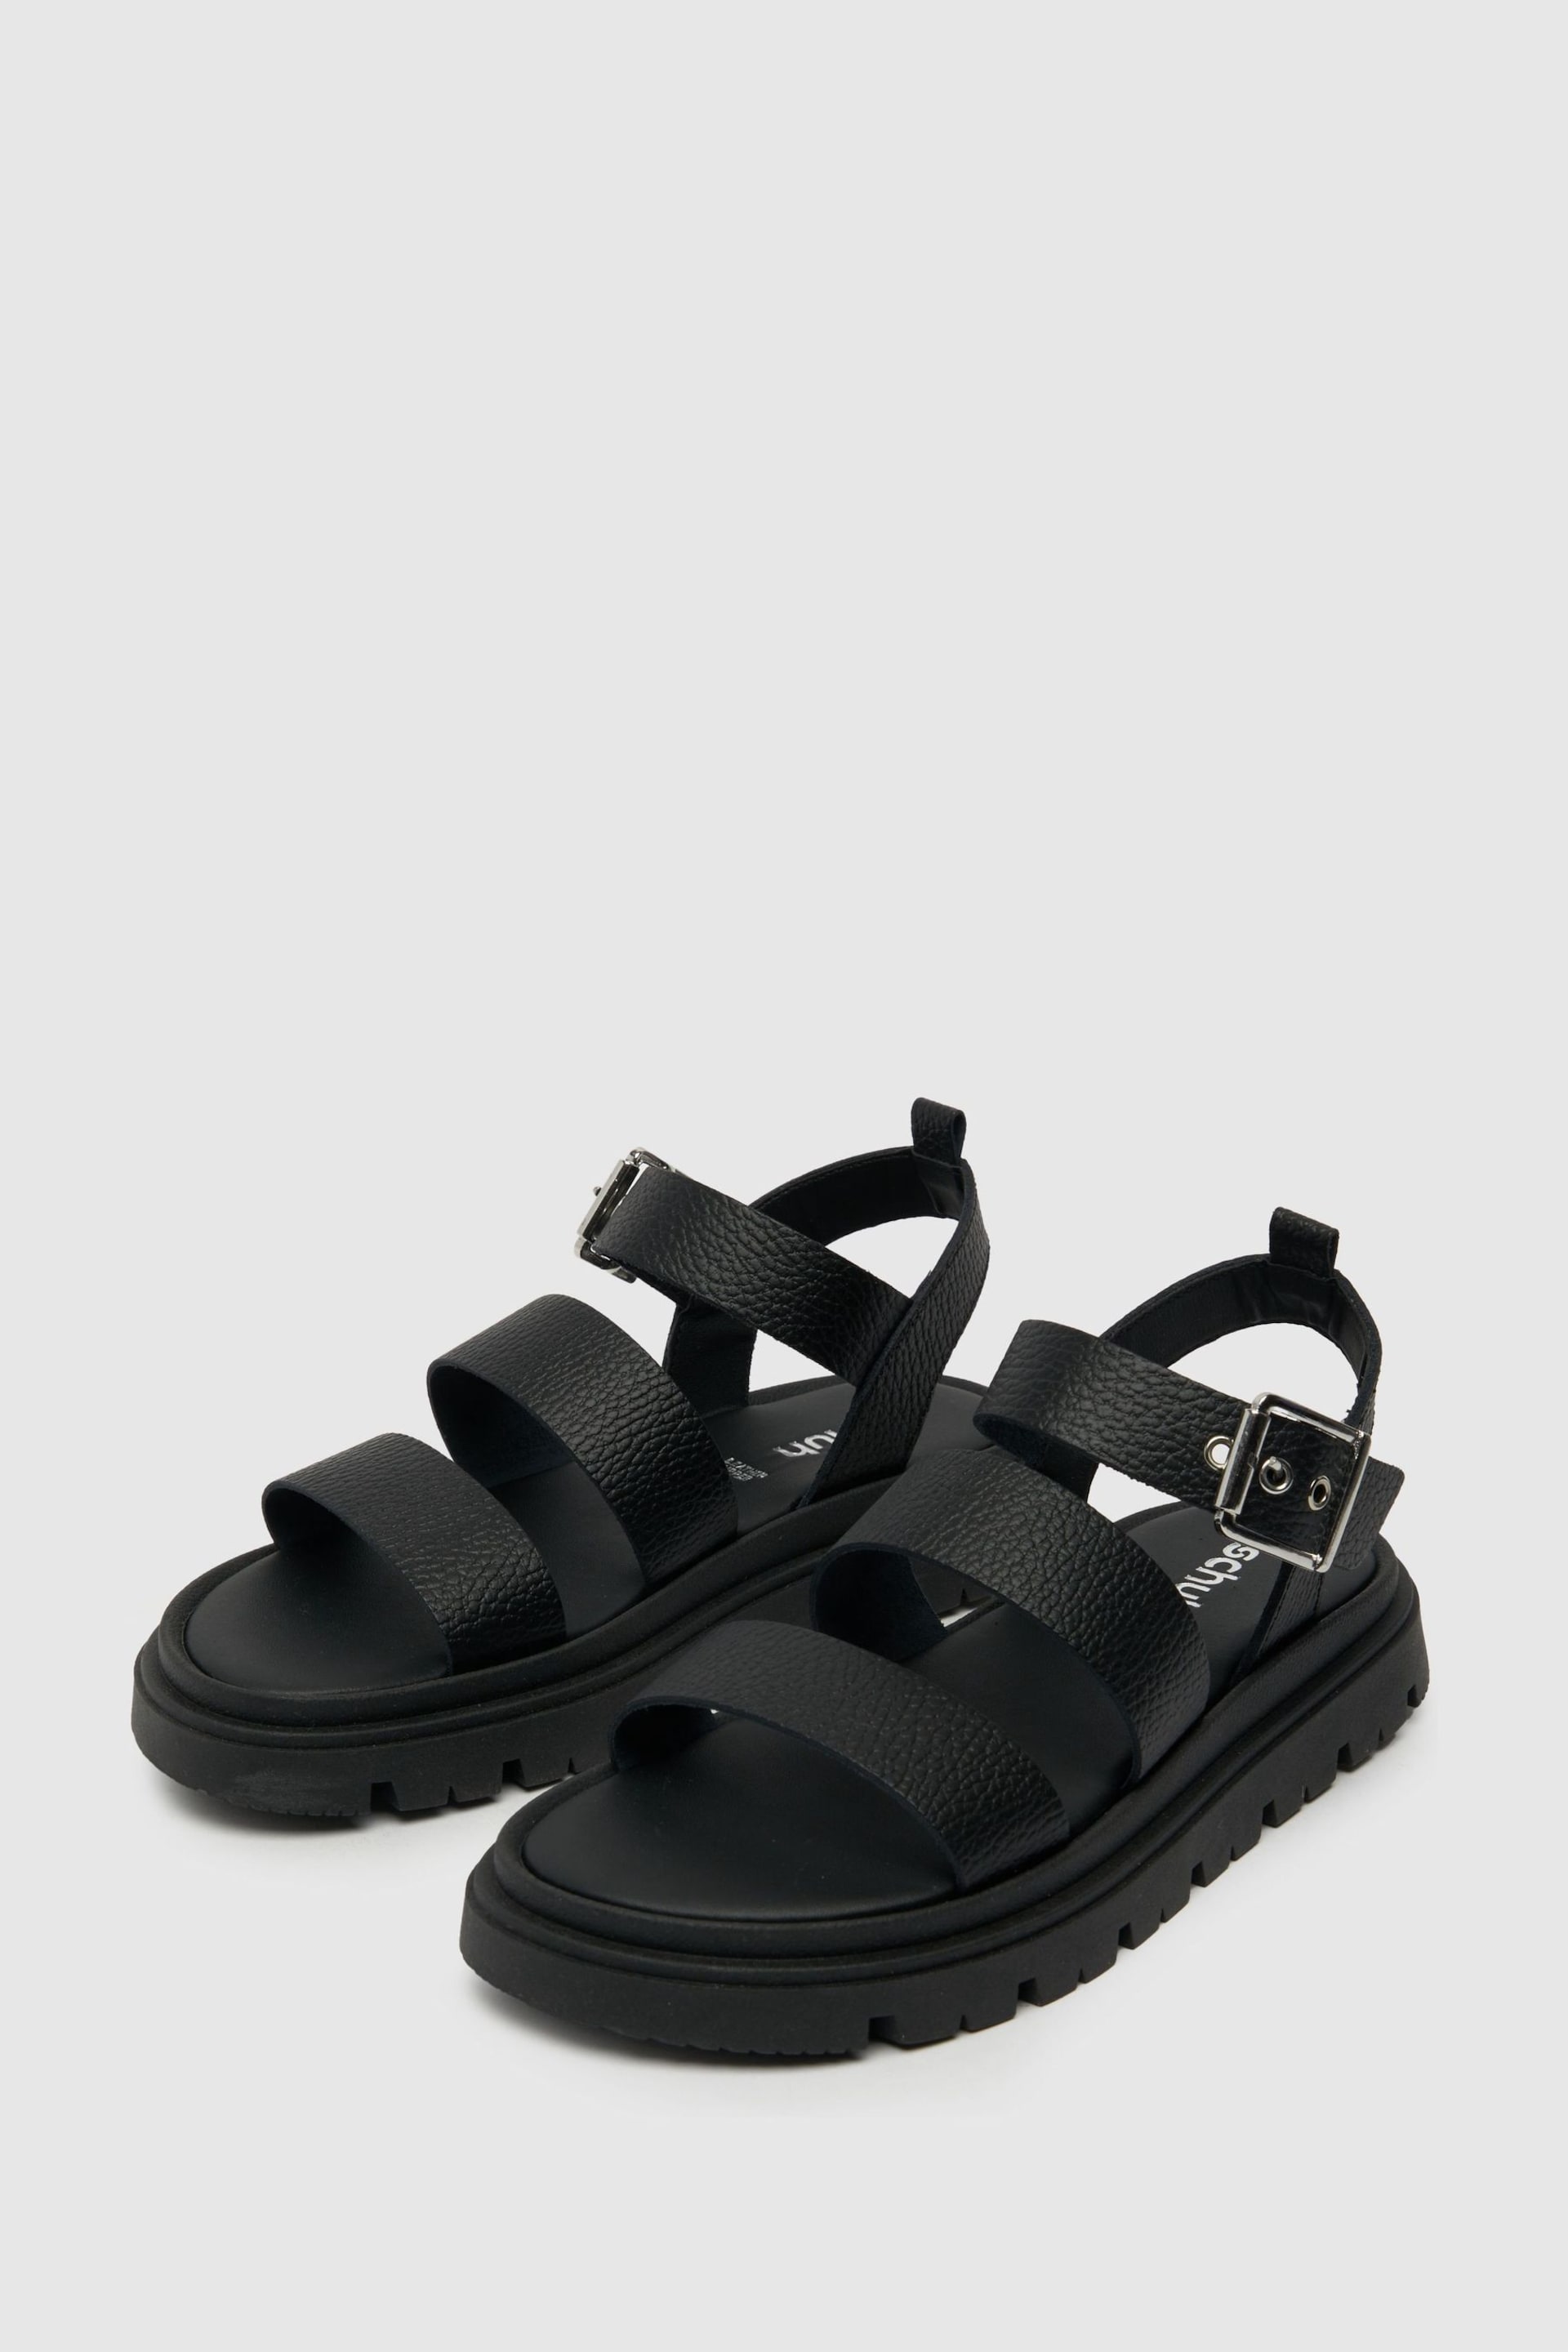 Schuh Tina Chunky Leather Sandals - Image 3 of 4